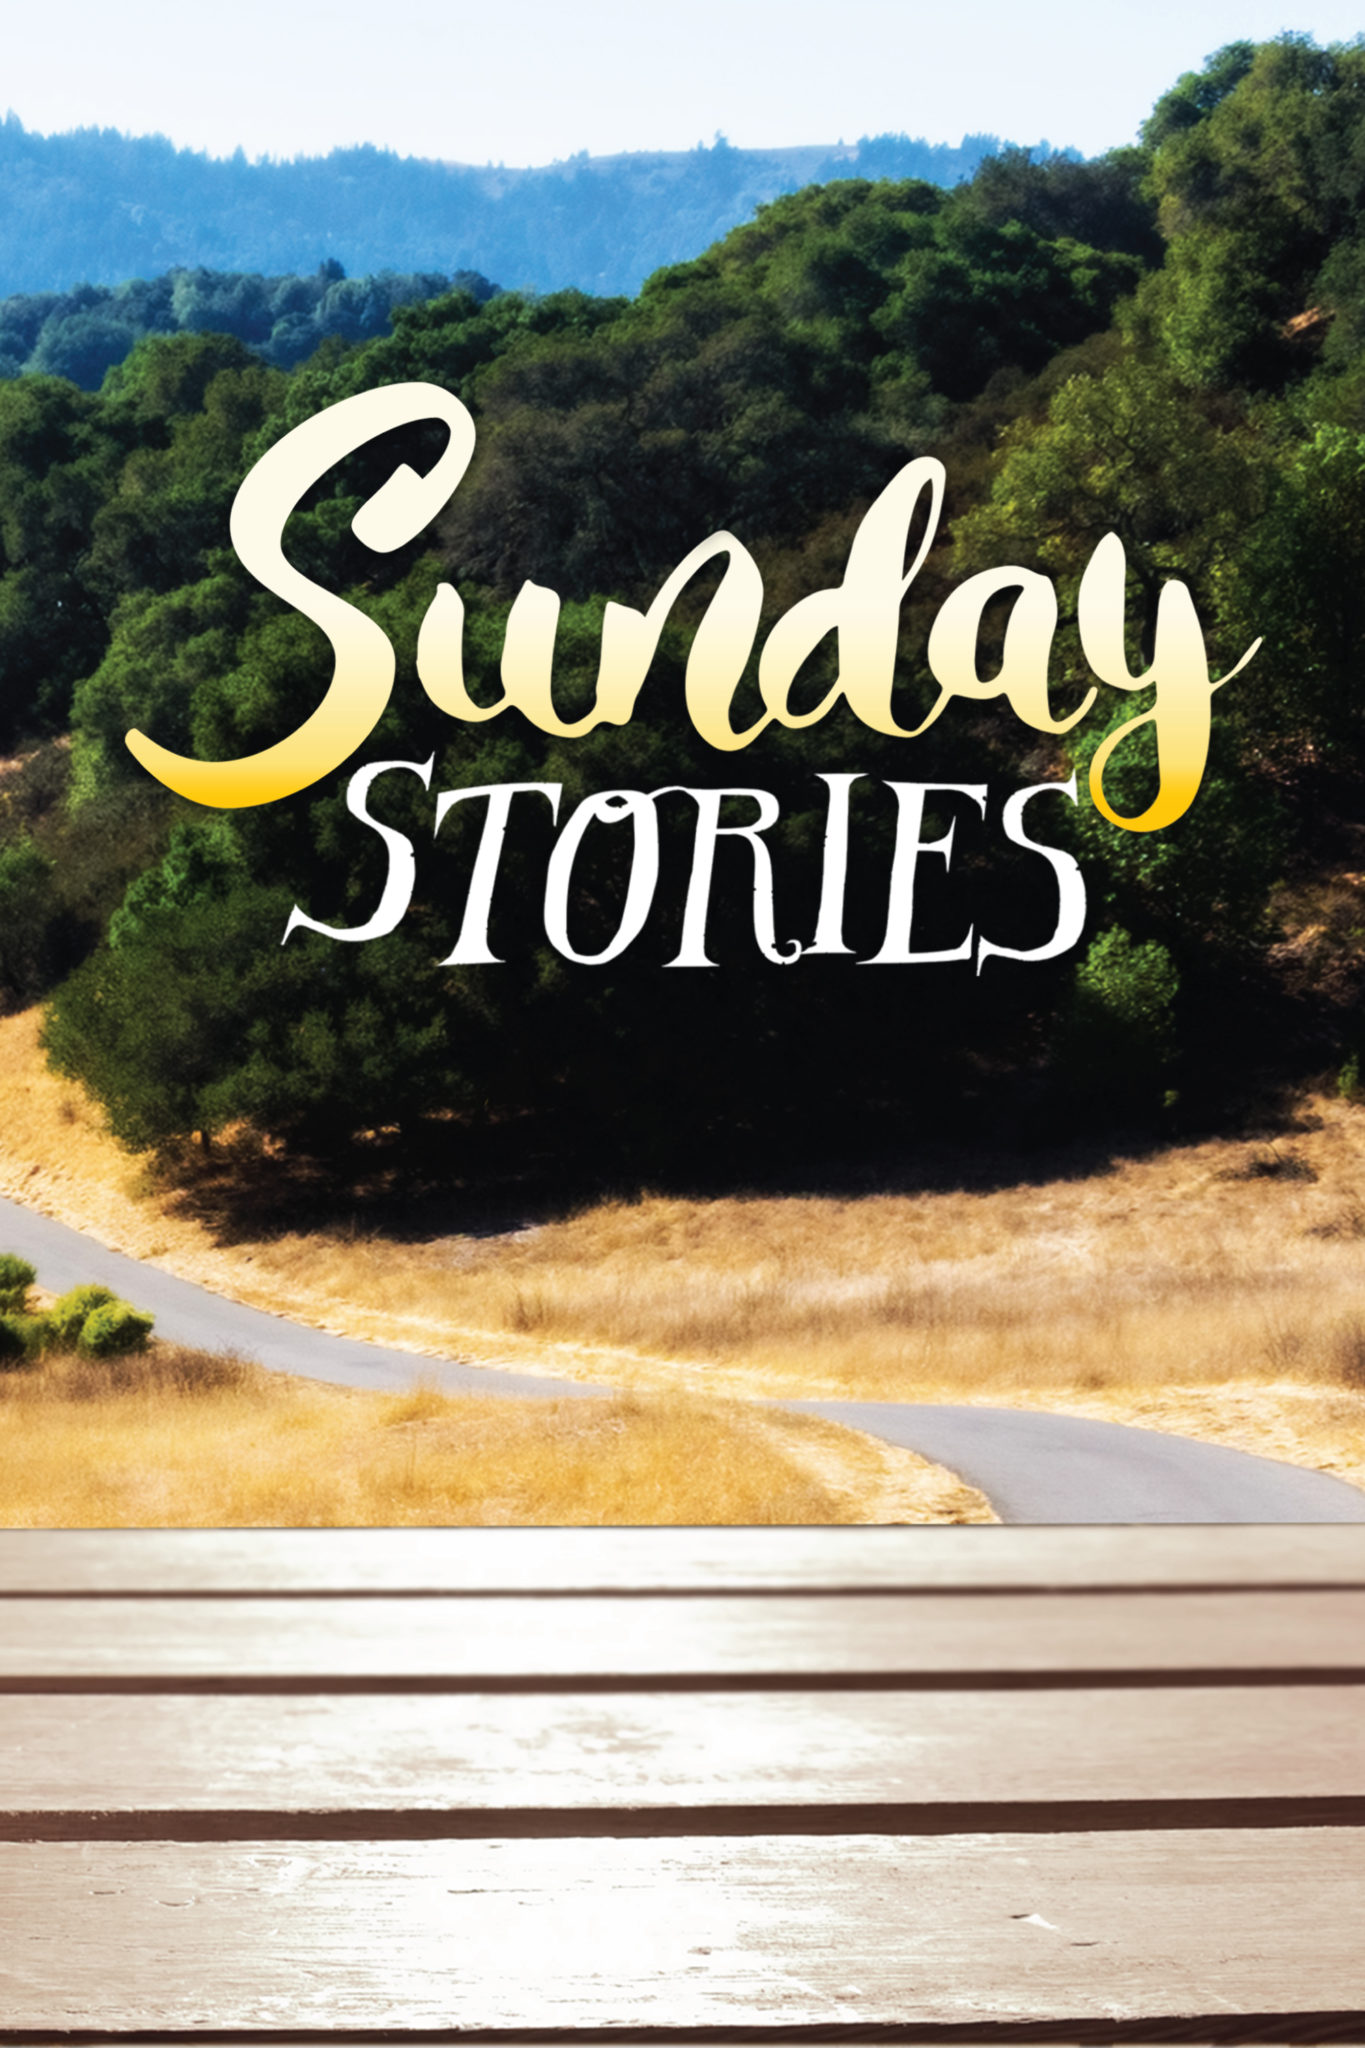 Sunday Stories logo over a Sierra Foothills trail